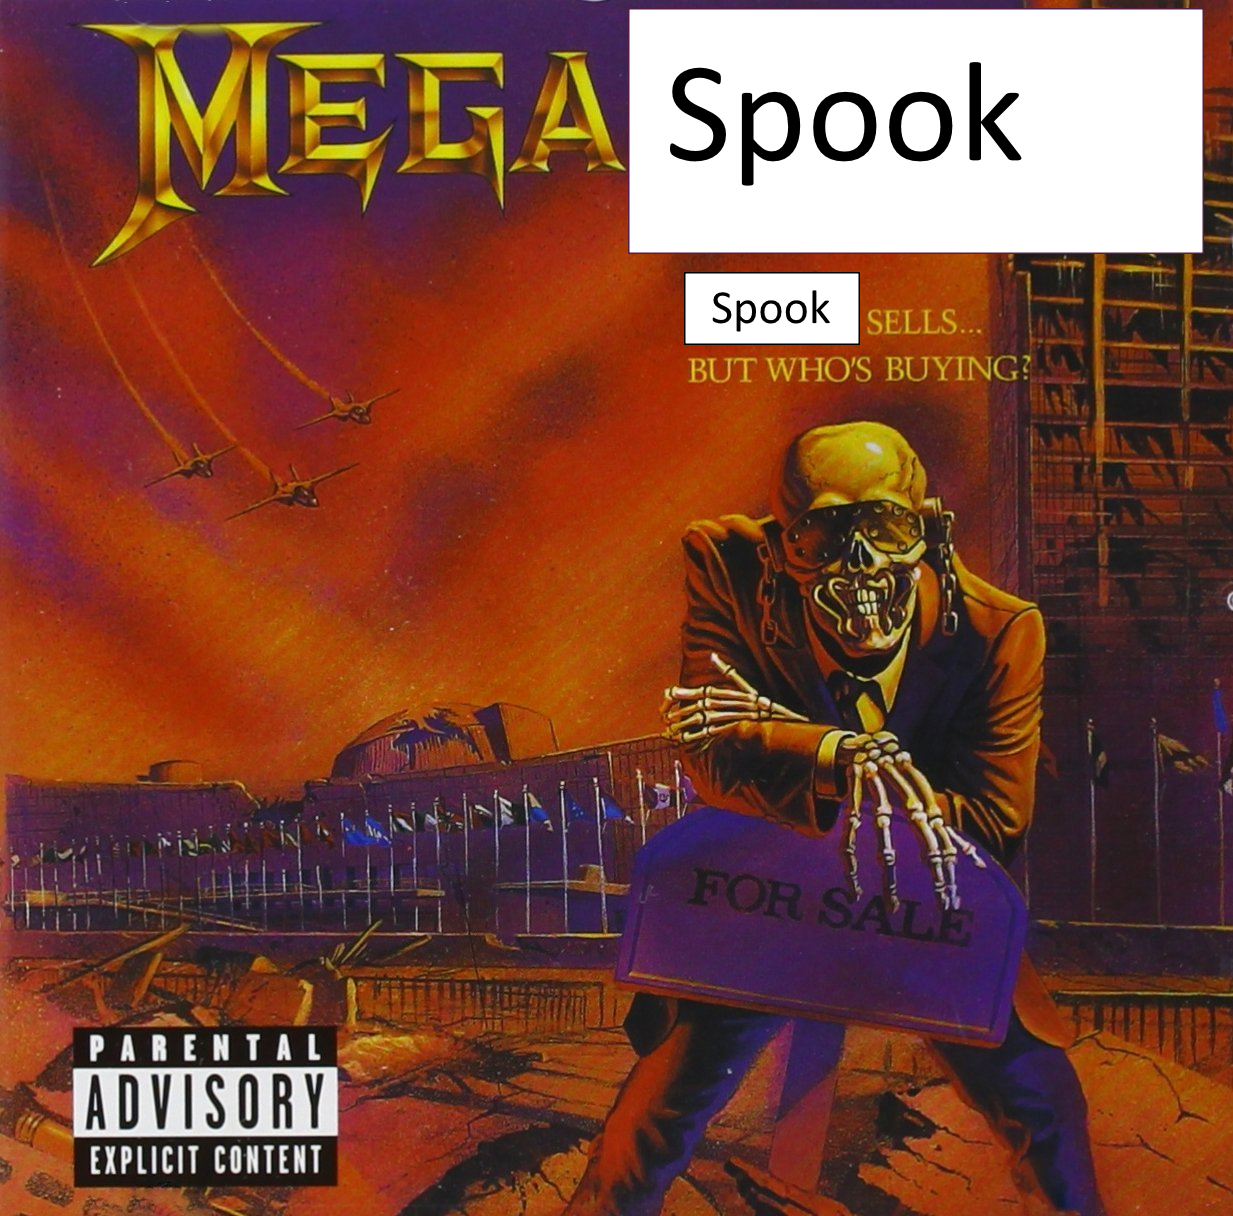 Can you put a price on spook